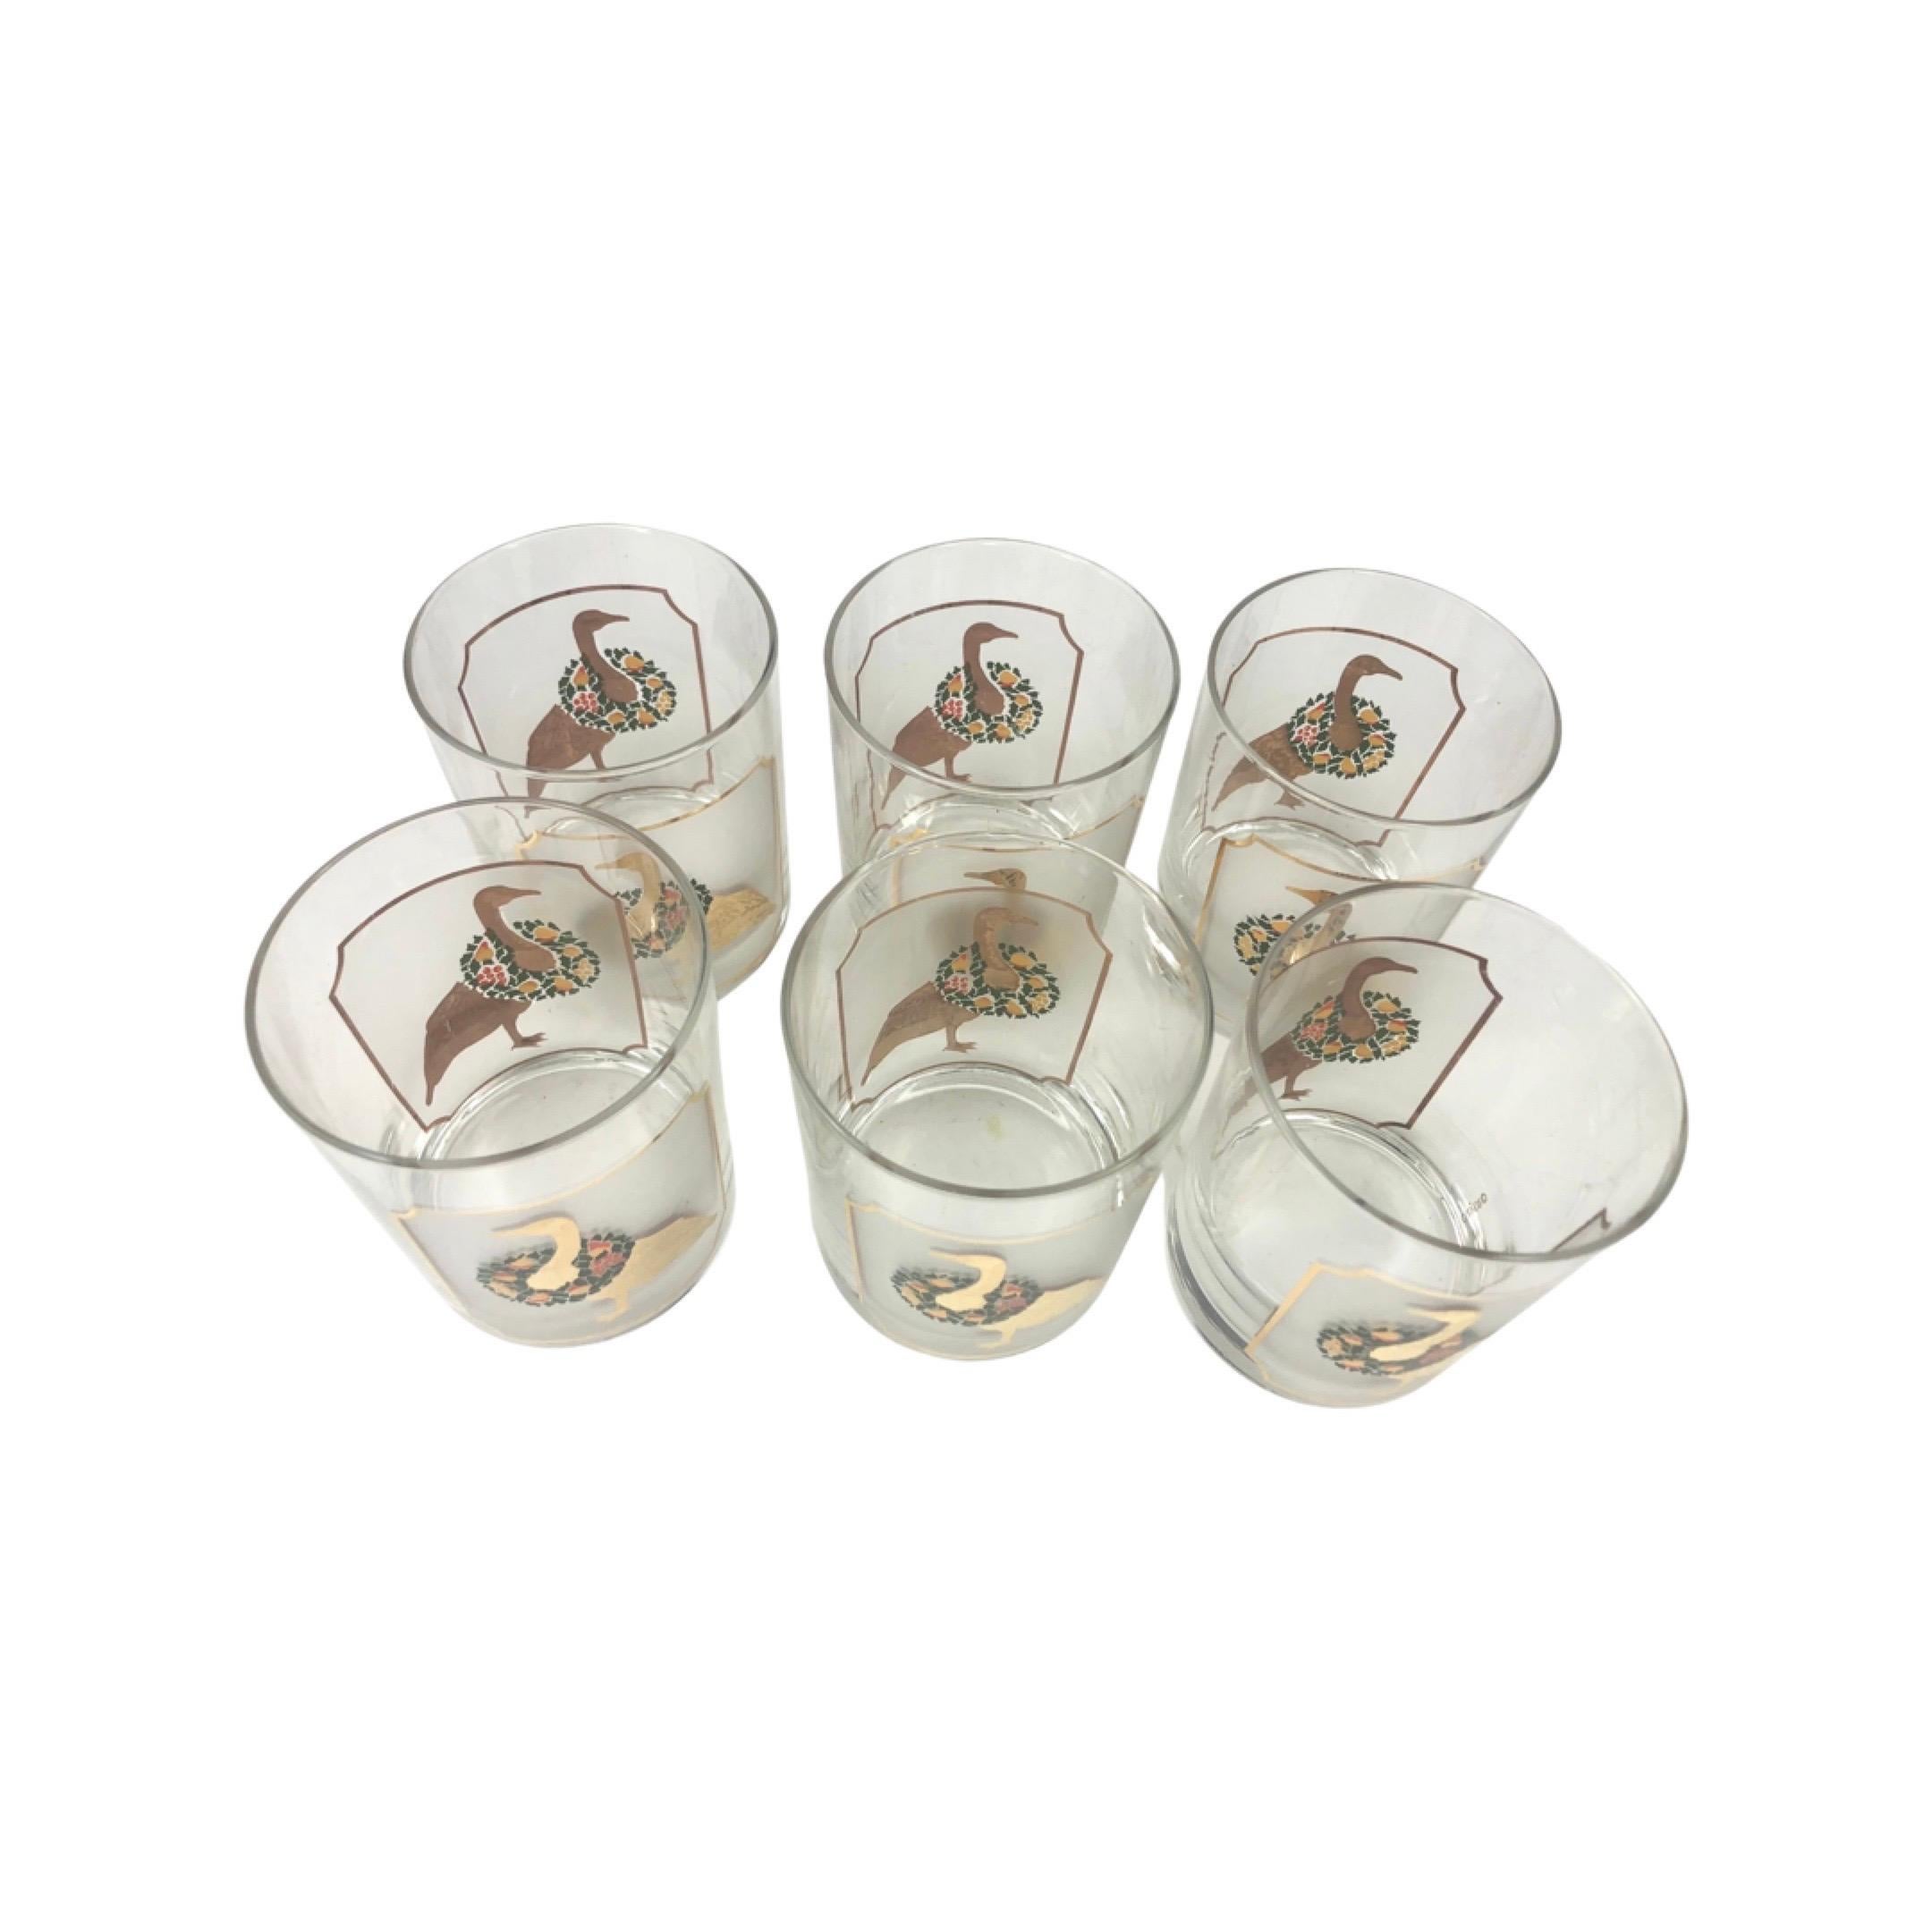 Set of 6 Vintage Culver Festive GeeseOld Fashioned Glasses. Each glass with 2 gold geese adorned with a festive and colorful wreath of various fruits on a frosted background framed in a 22k outline.
Signed Culver on the side. All in excellent